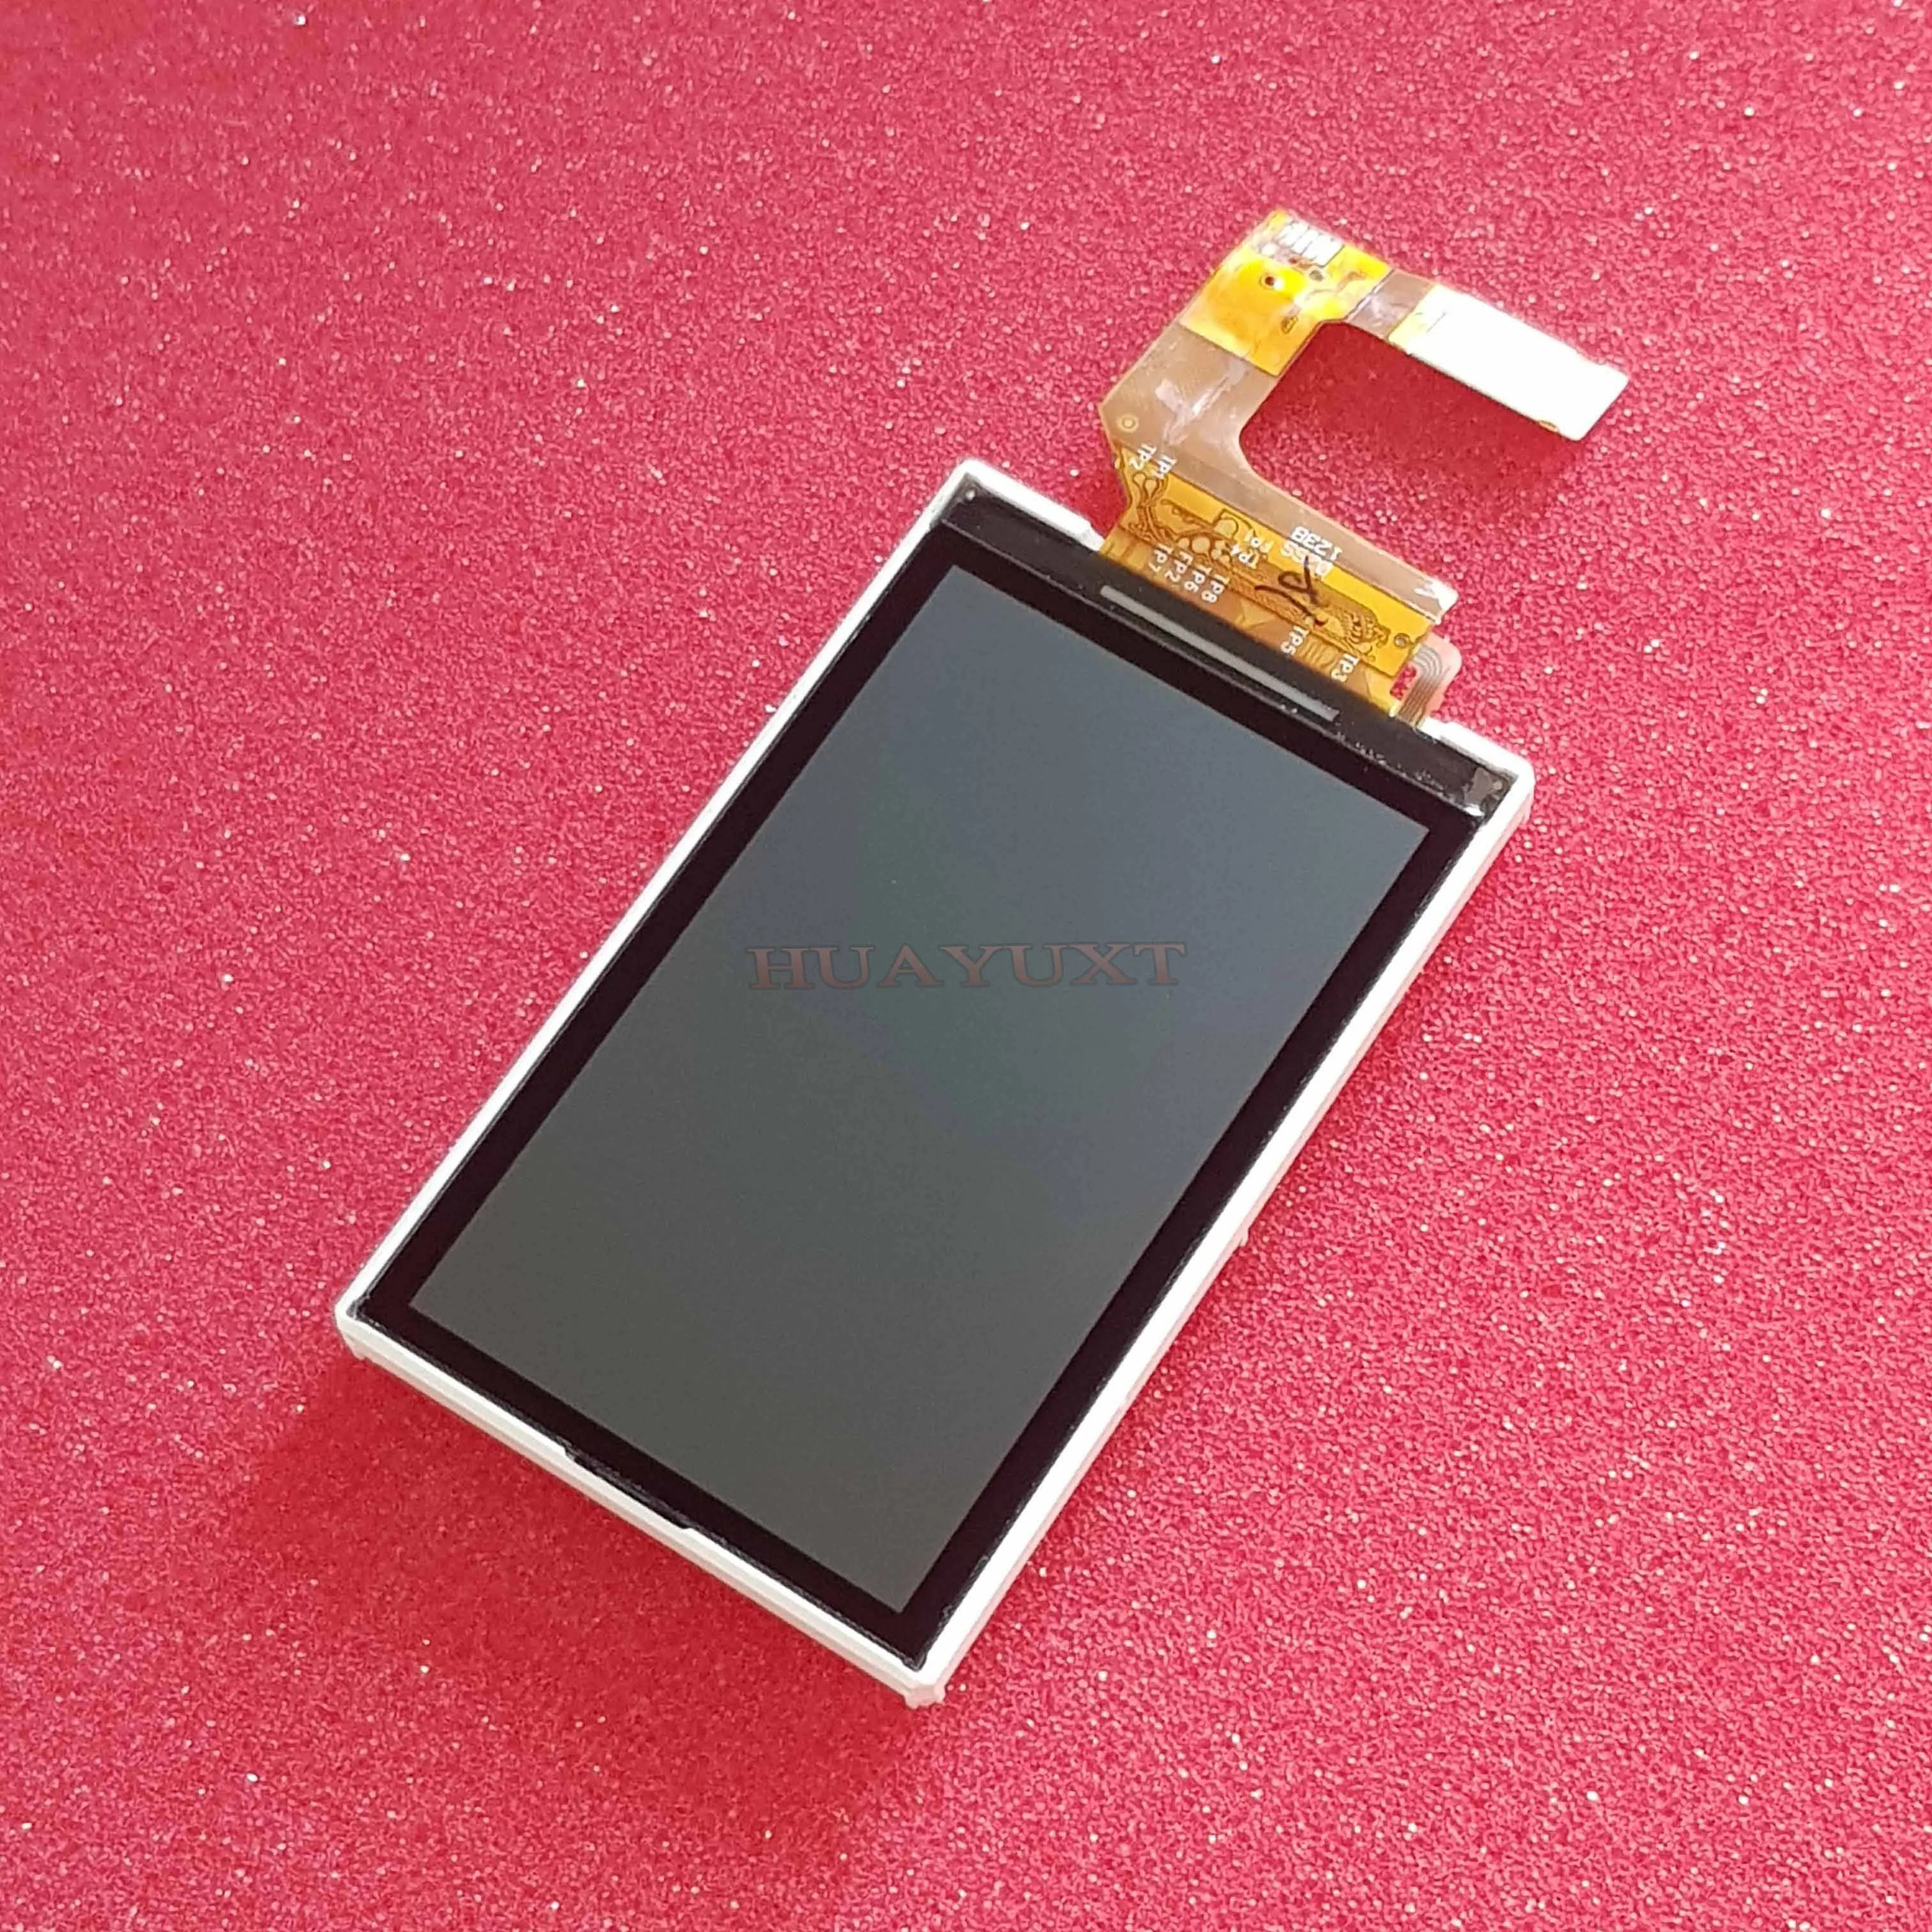 Original used LCD screen for GARMIN Alpha 100 without Touch screen digitizer for Alpha 100 lcd garmin Repair replacement